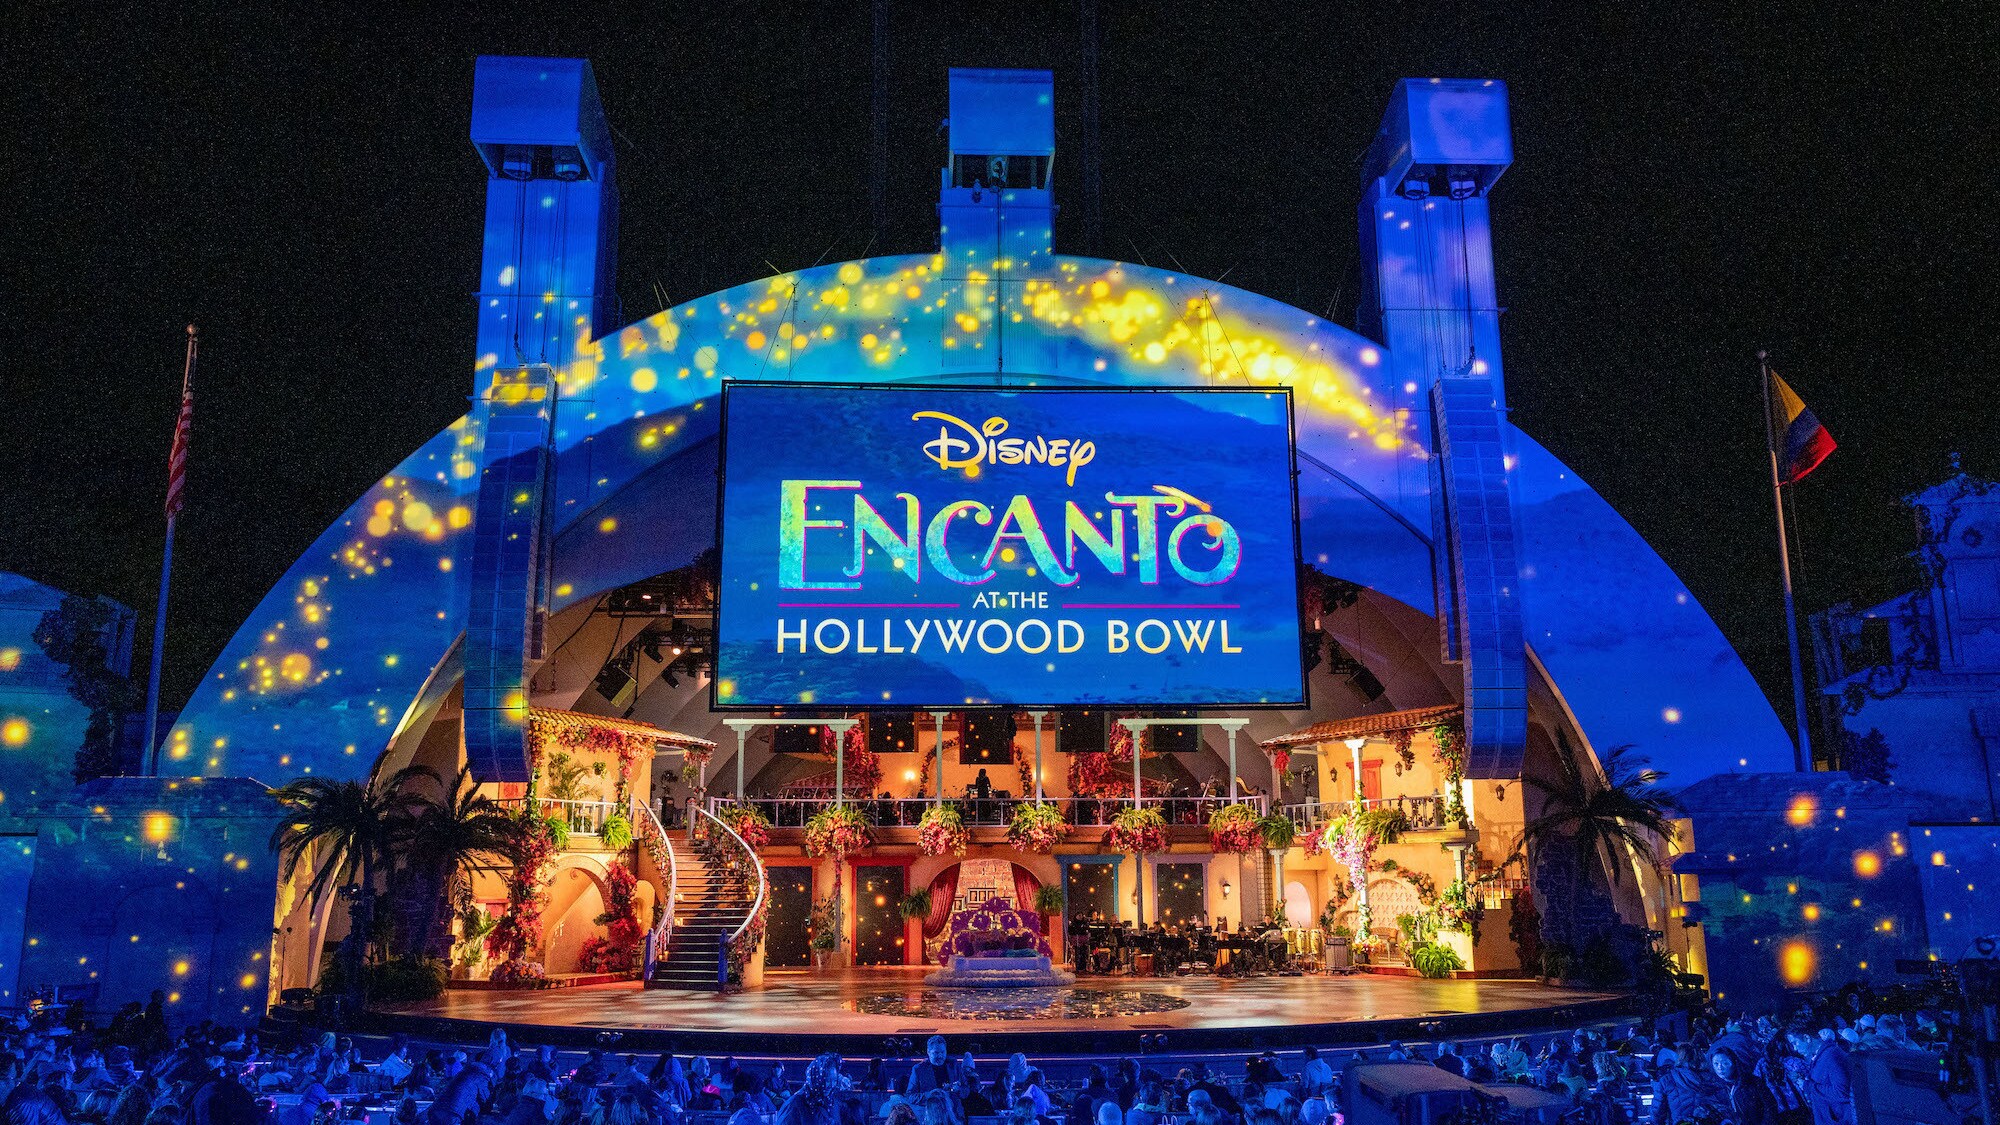 New Trailer And Key Art Now Available For ‘Encanto At The Hollywood Bowl,’ Streaming Dec. 28 On Disney+